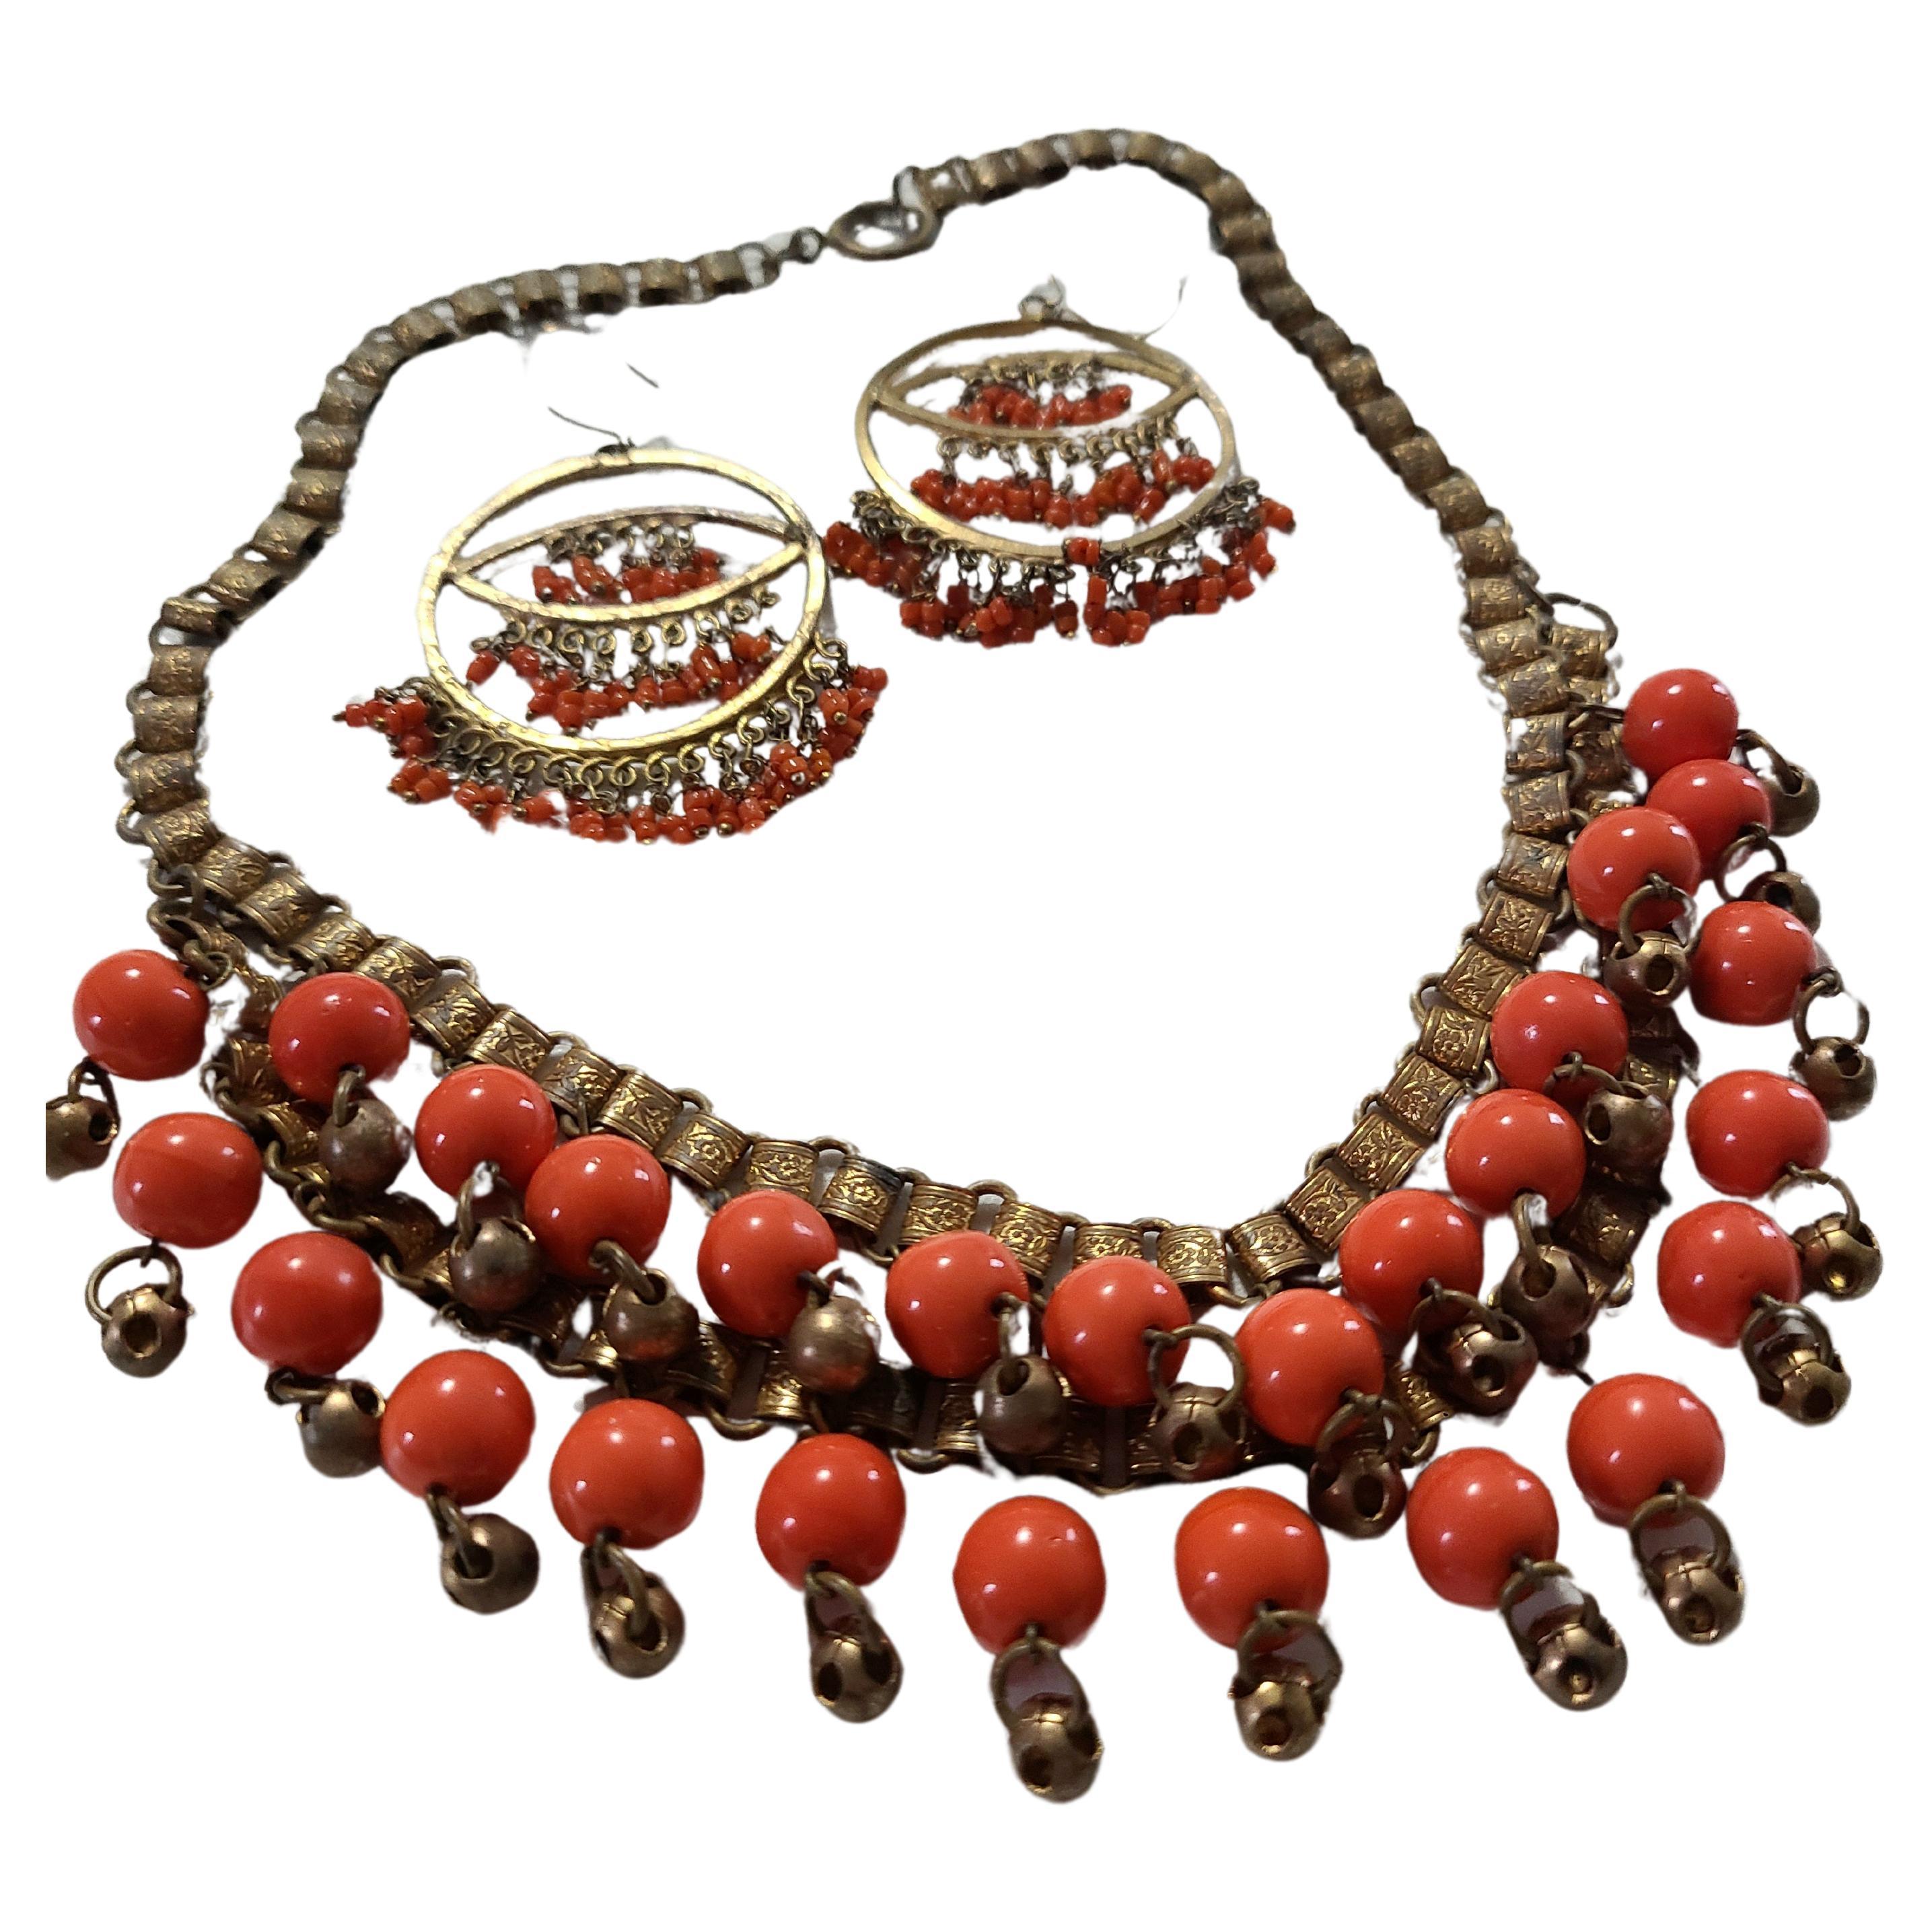 1930s Miriam Haskell Persimmon Dangling Bead Bib Necklace & Earring Set